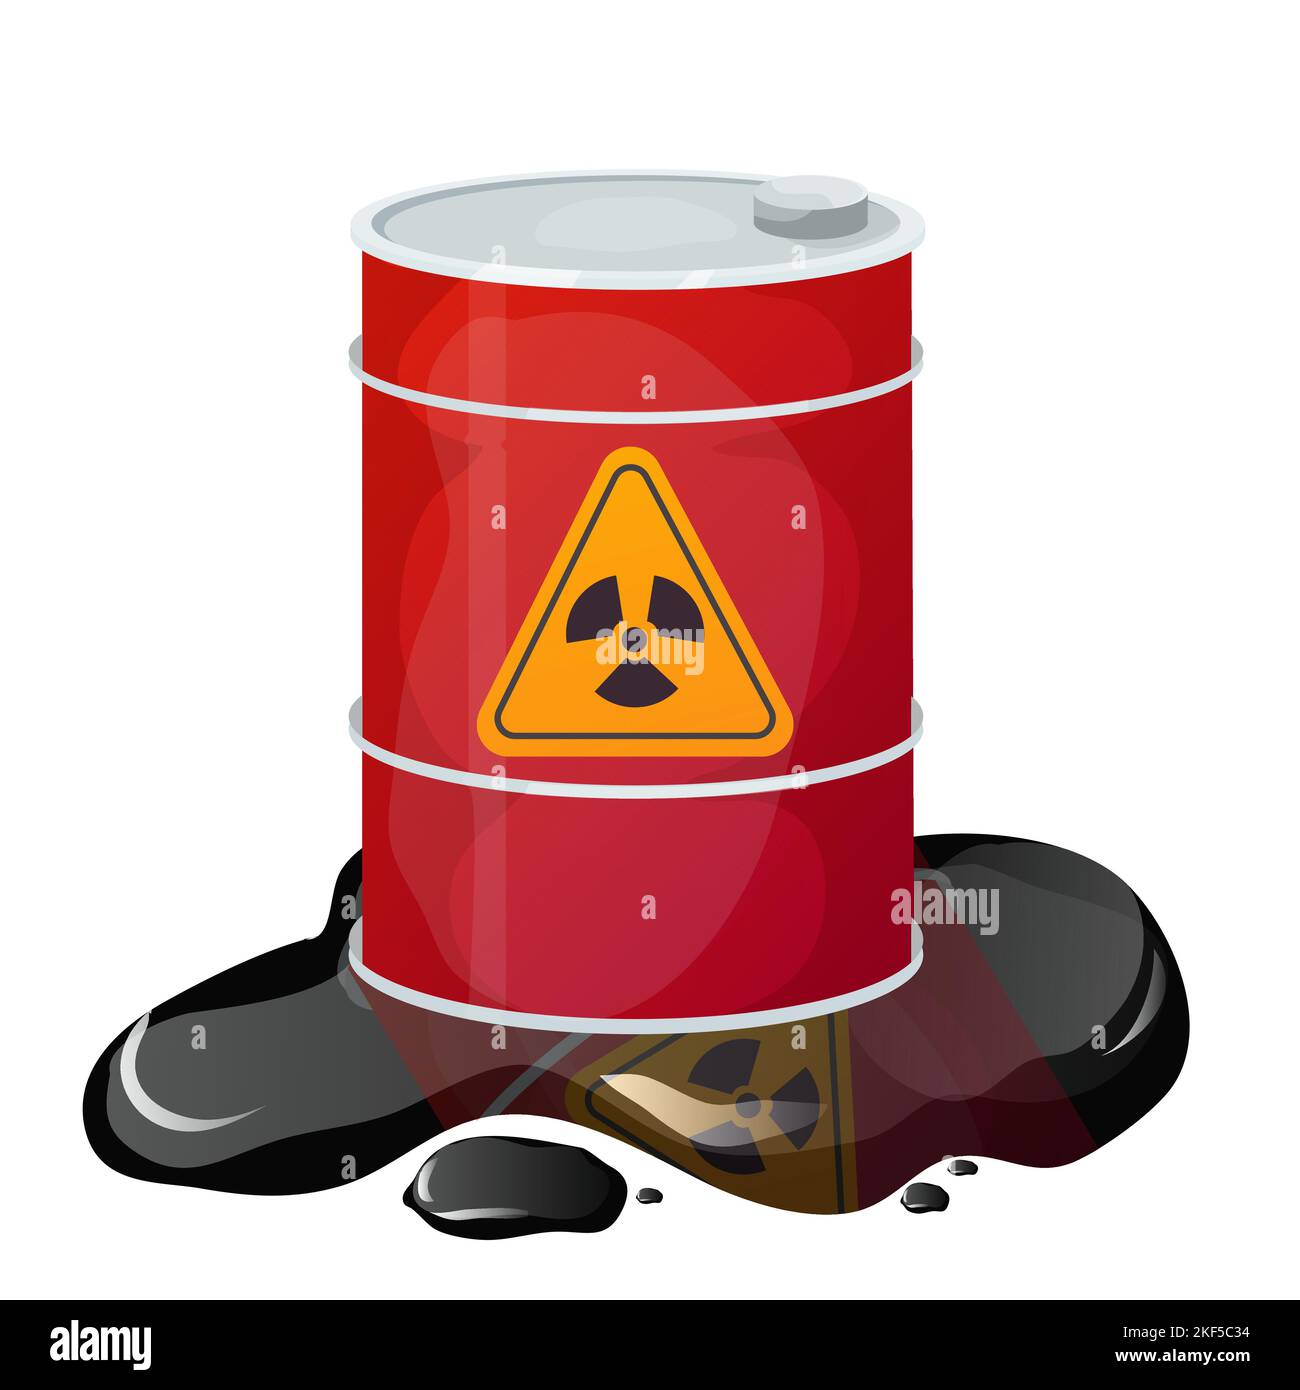 Metal red barrel toxic, dangerous sign with liquid around, waste, pollution in cartoon style isolated on white background. Radioactive, flammable material. Vector illustration Stock Vector